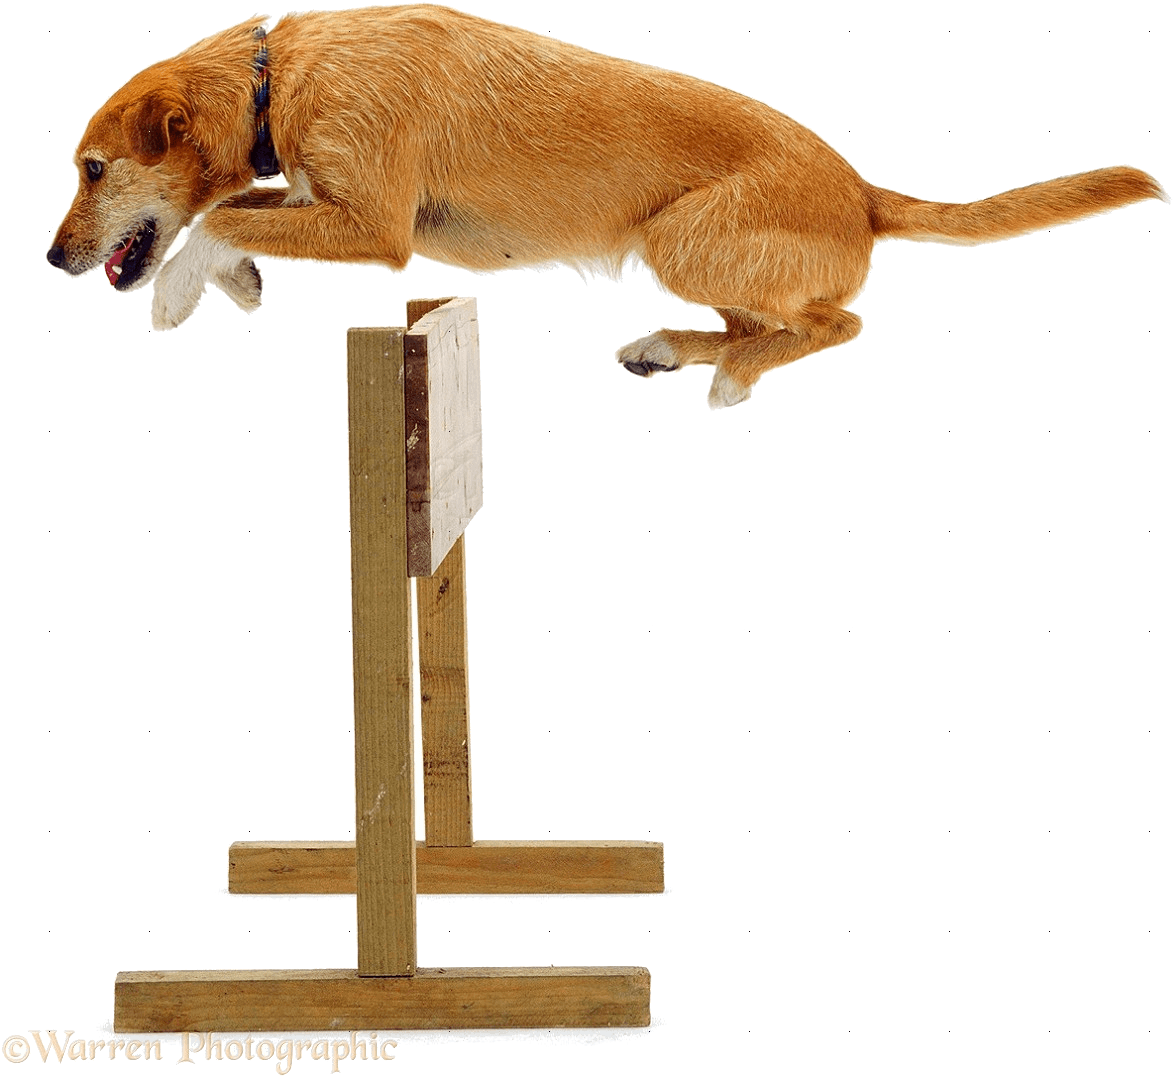 A Dog Jumping Over A Wooden Structure